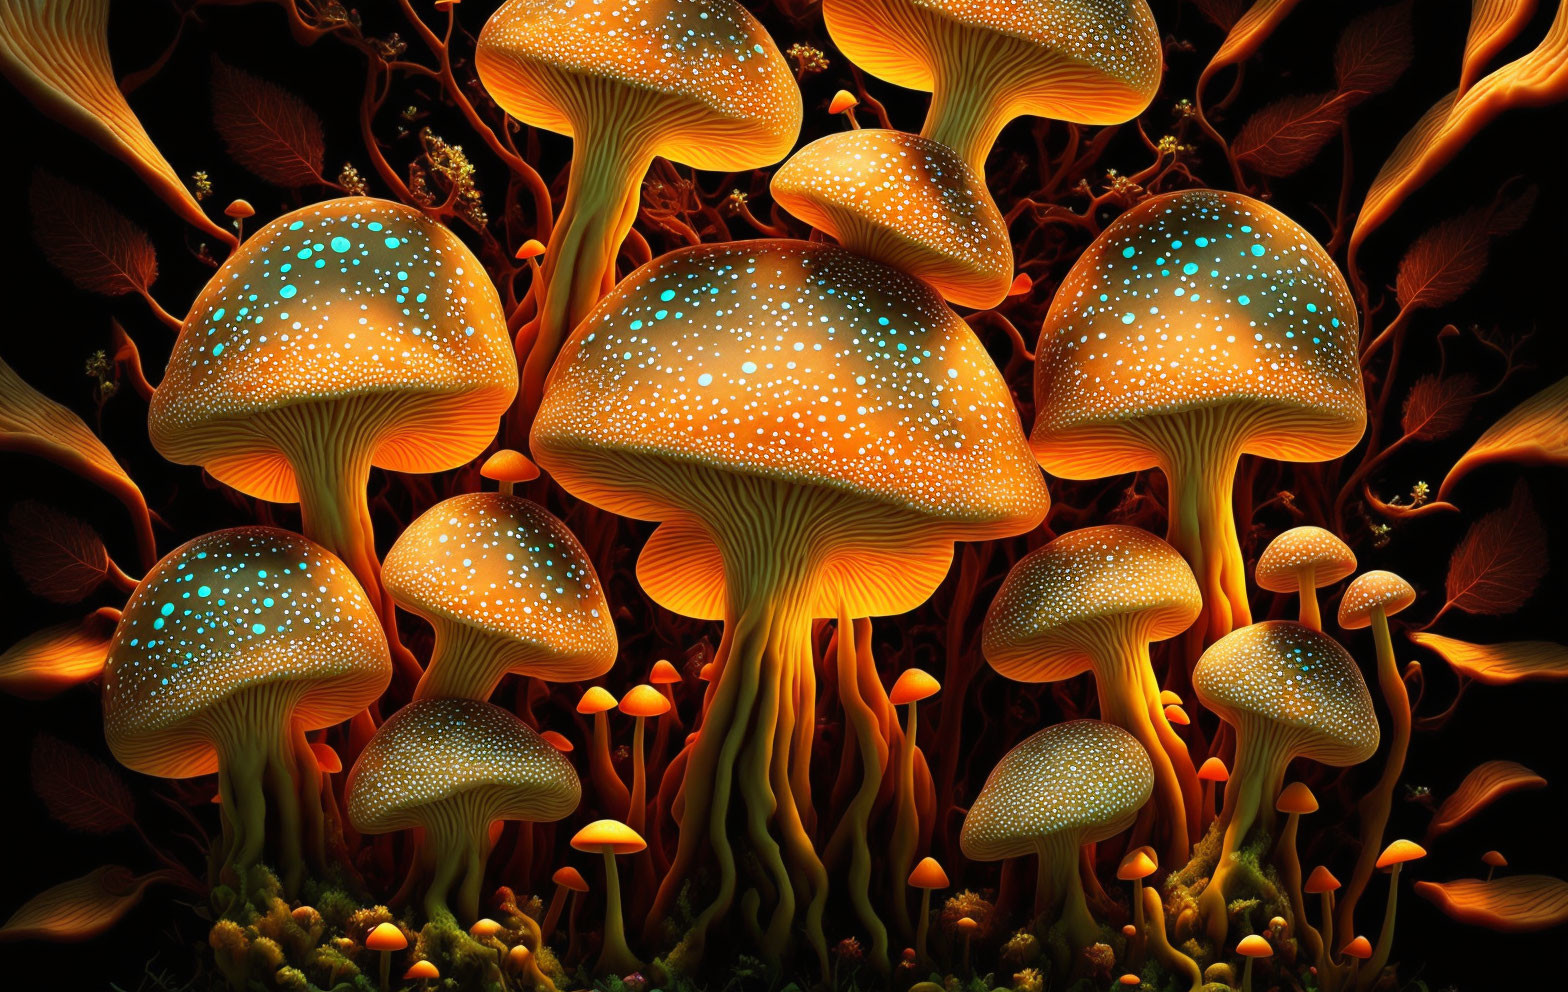 Colorful digital artwork featuring luminescent dotted mushrooms on dark background